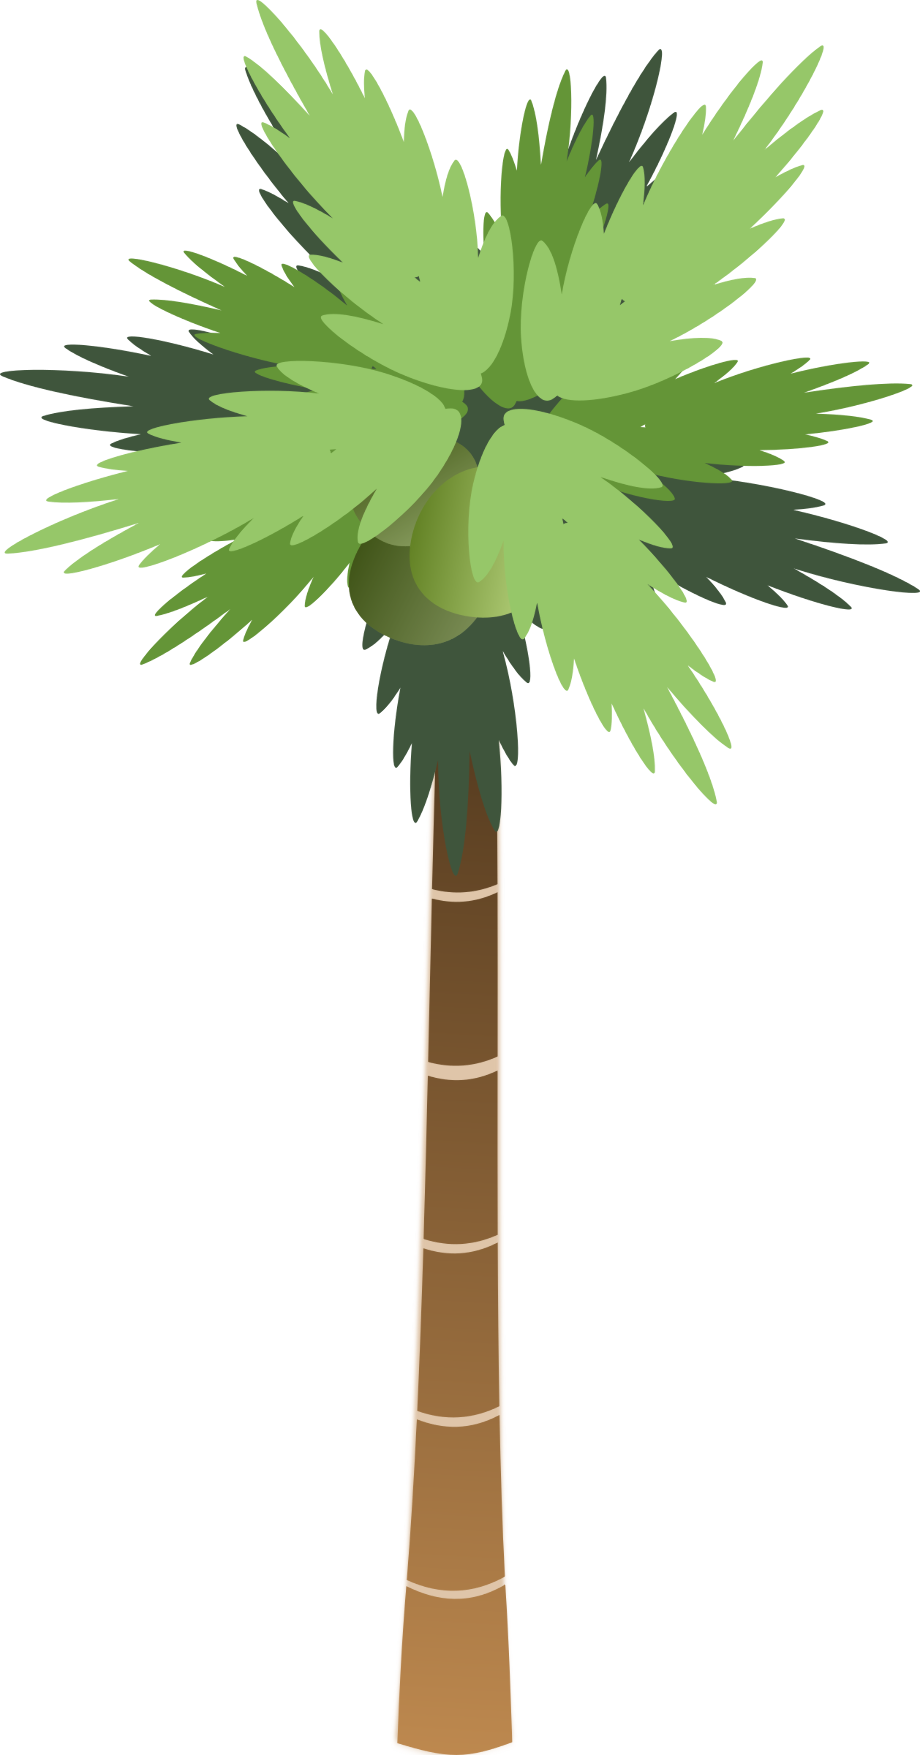 Tree clipart palm